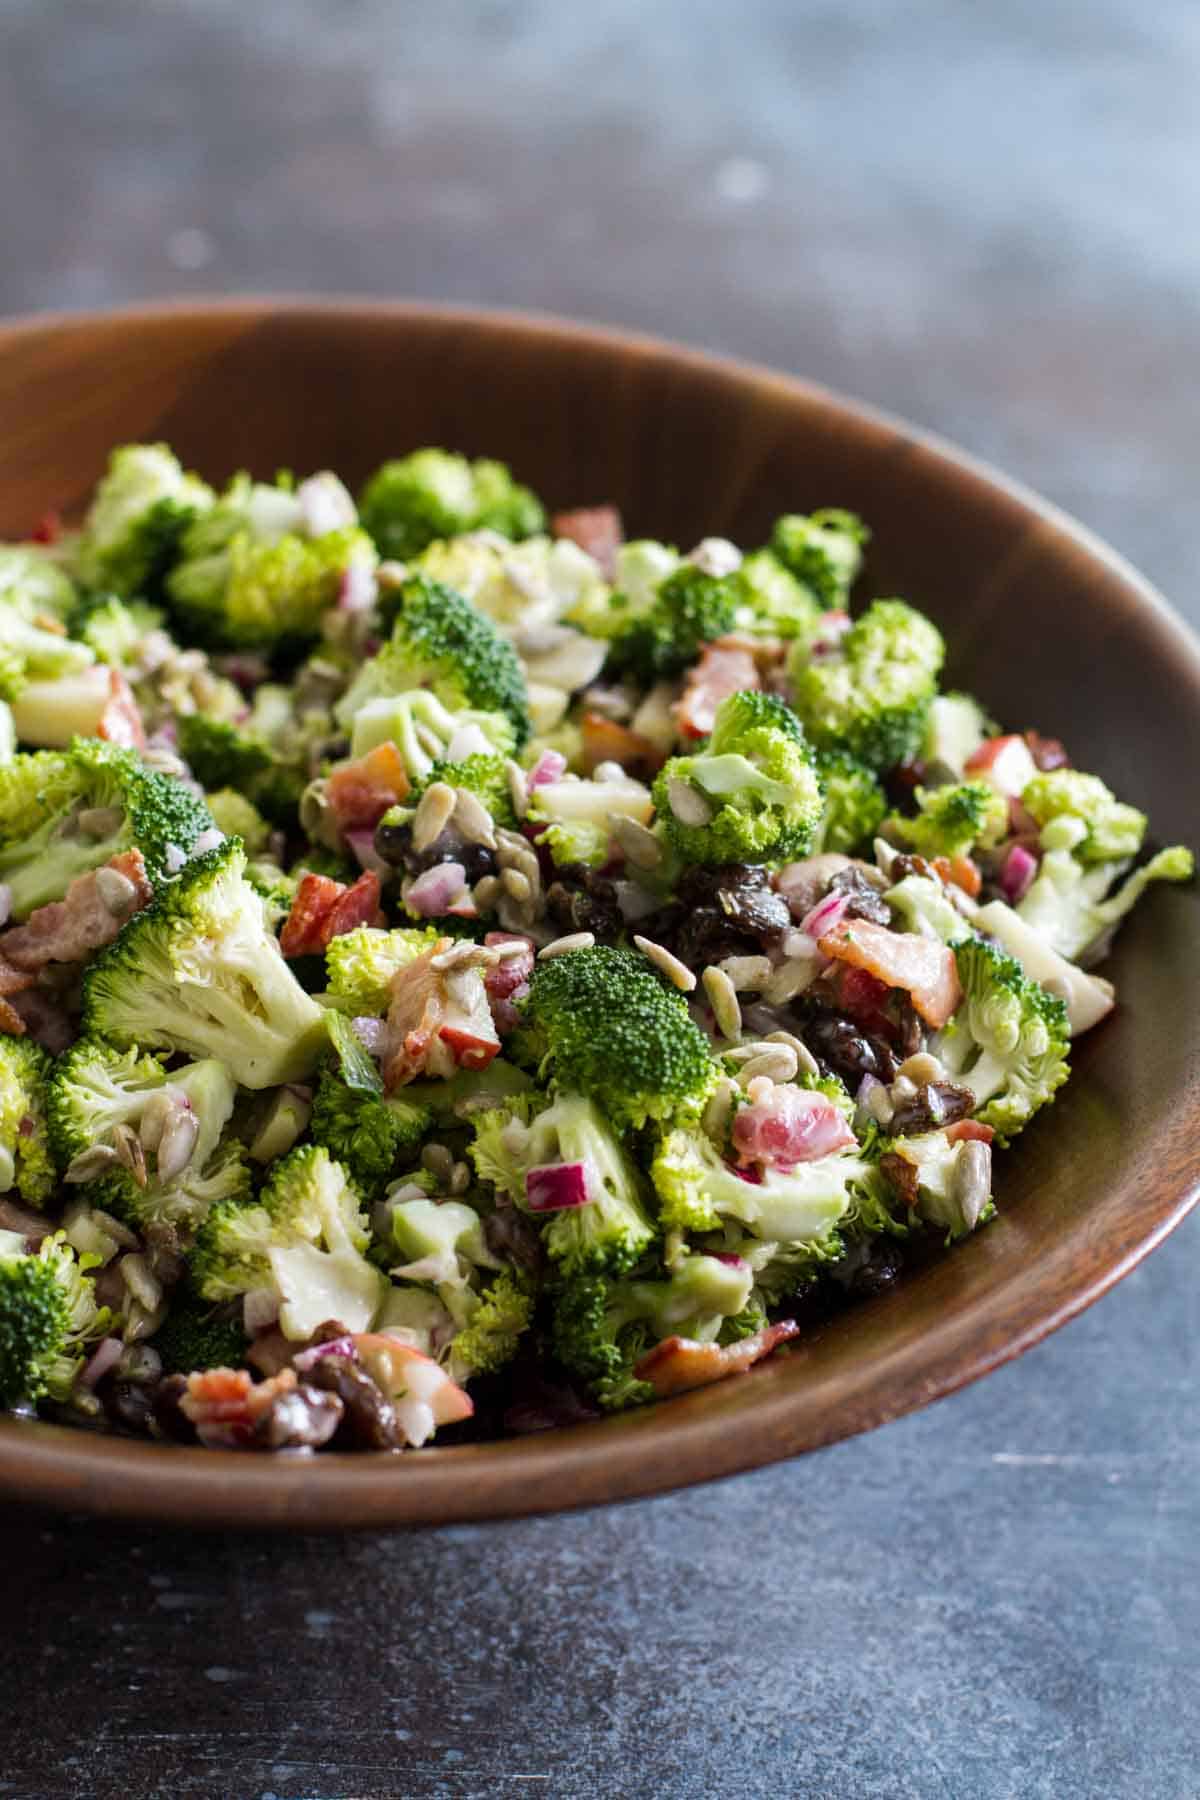 Classic Broccoli Salad Recipe with Bacon - Taste and Tell